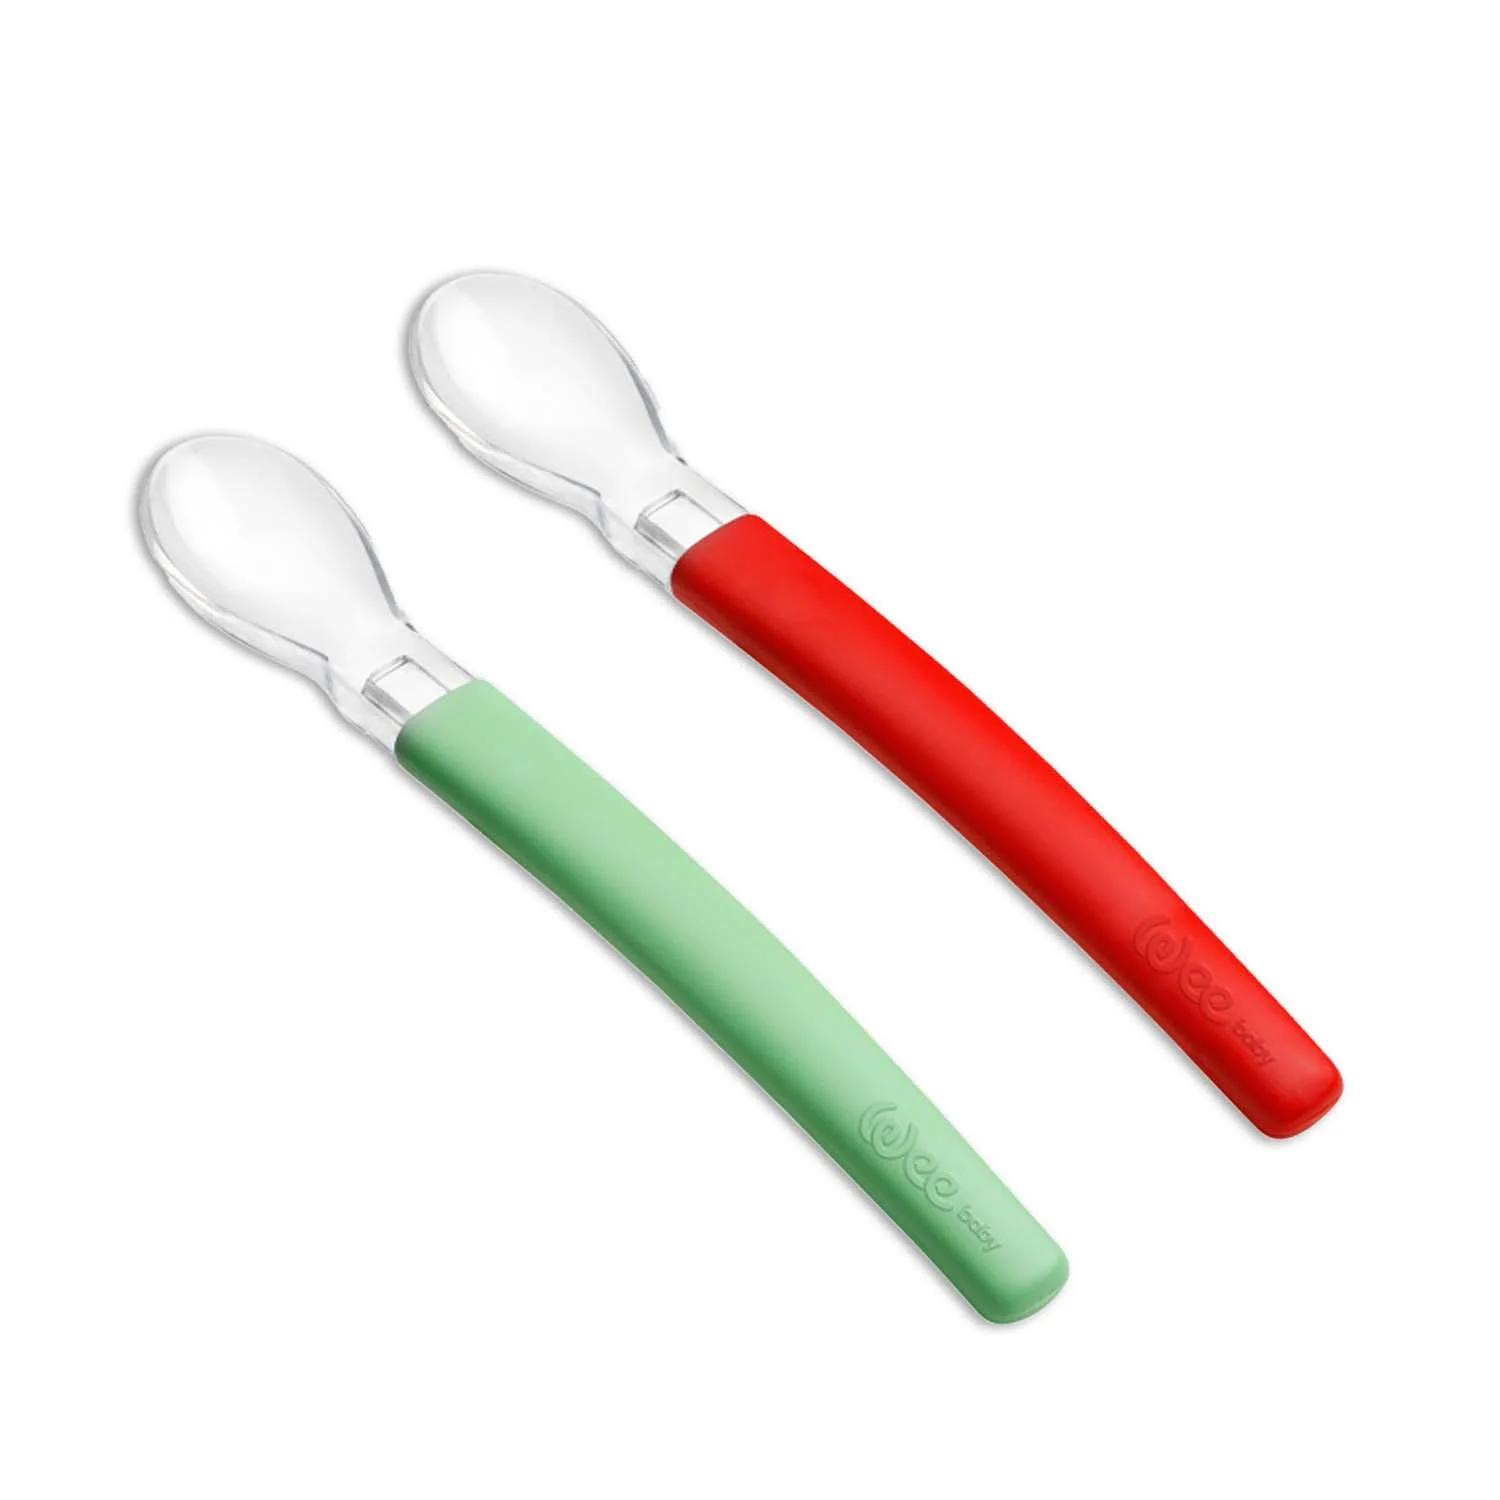 Wee Baby Feeding Spoon With Silicone